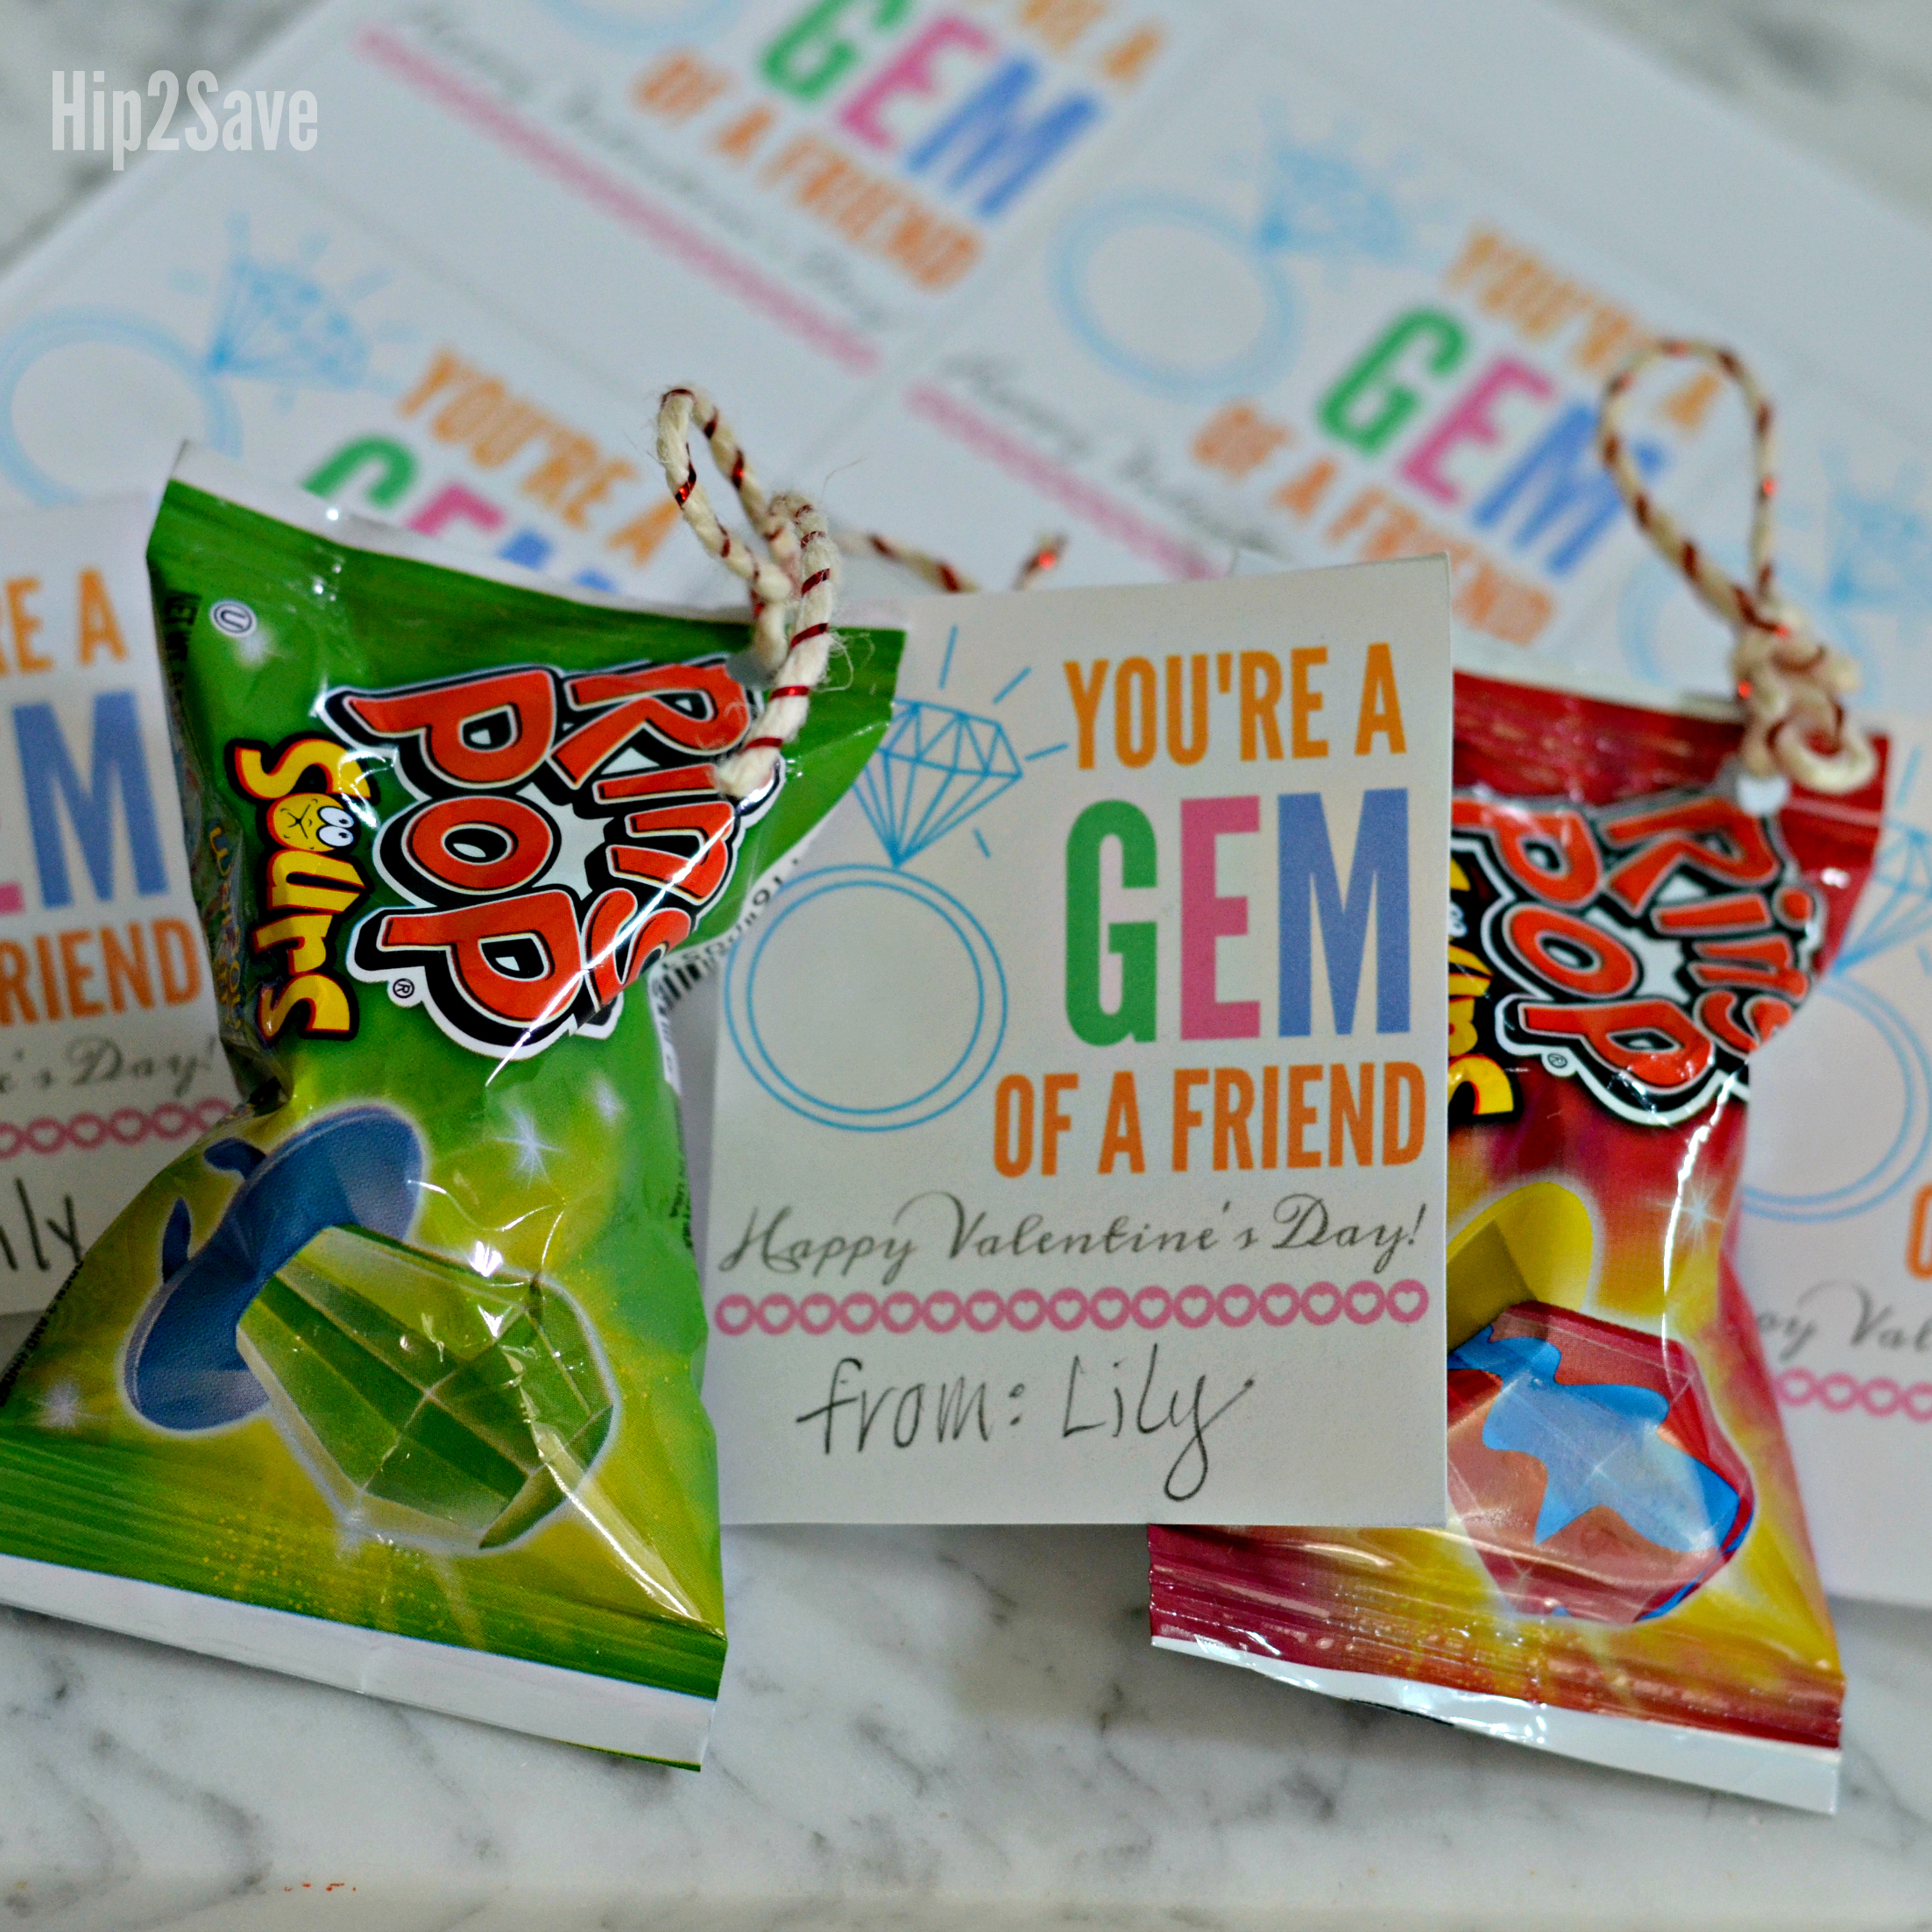 you-re-a-gem-of-a-friend-ring-pop-valentine-s-day-idea